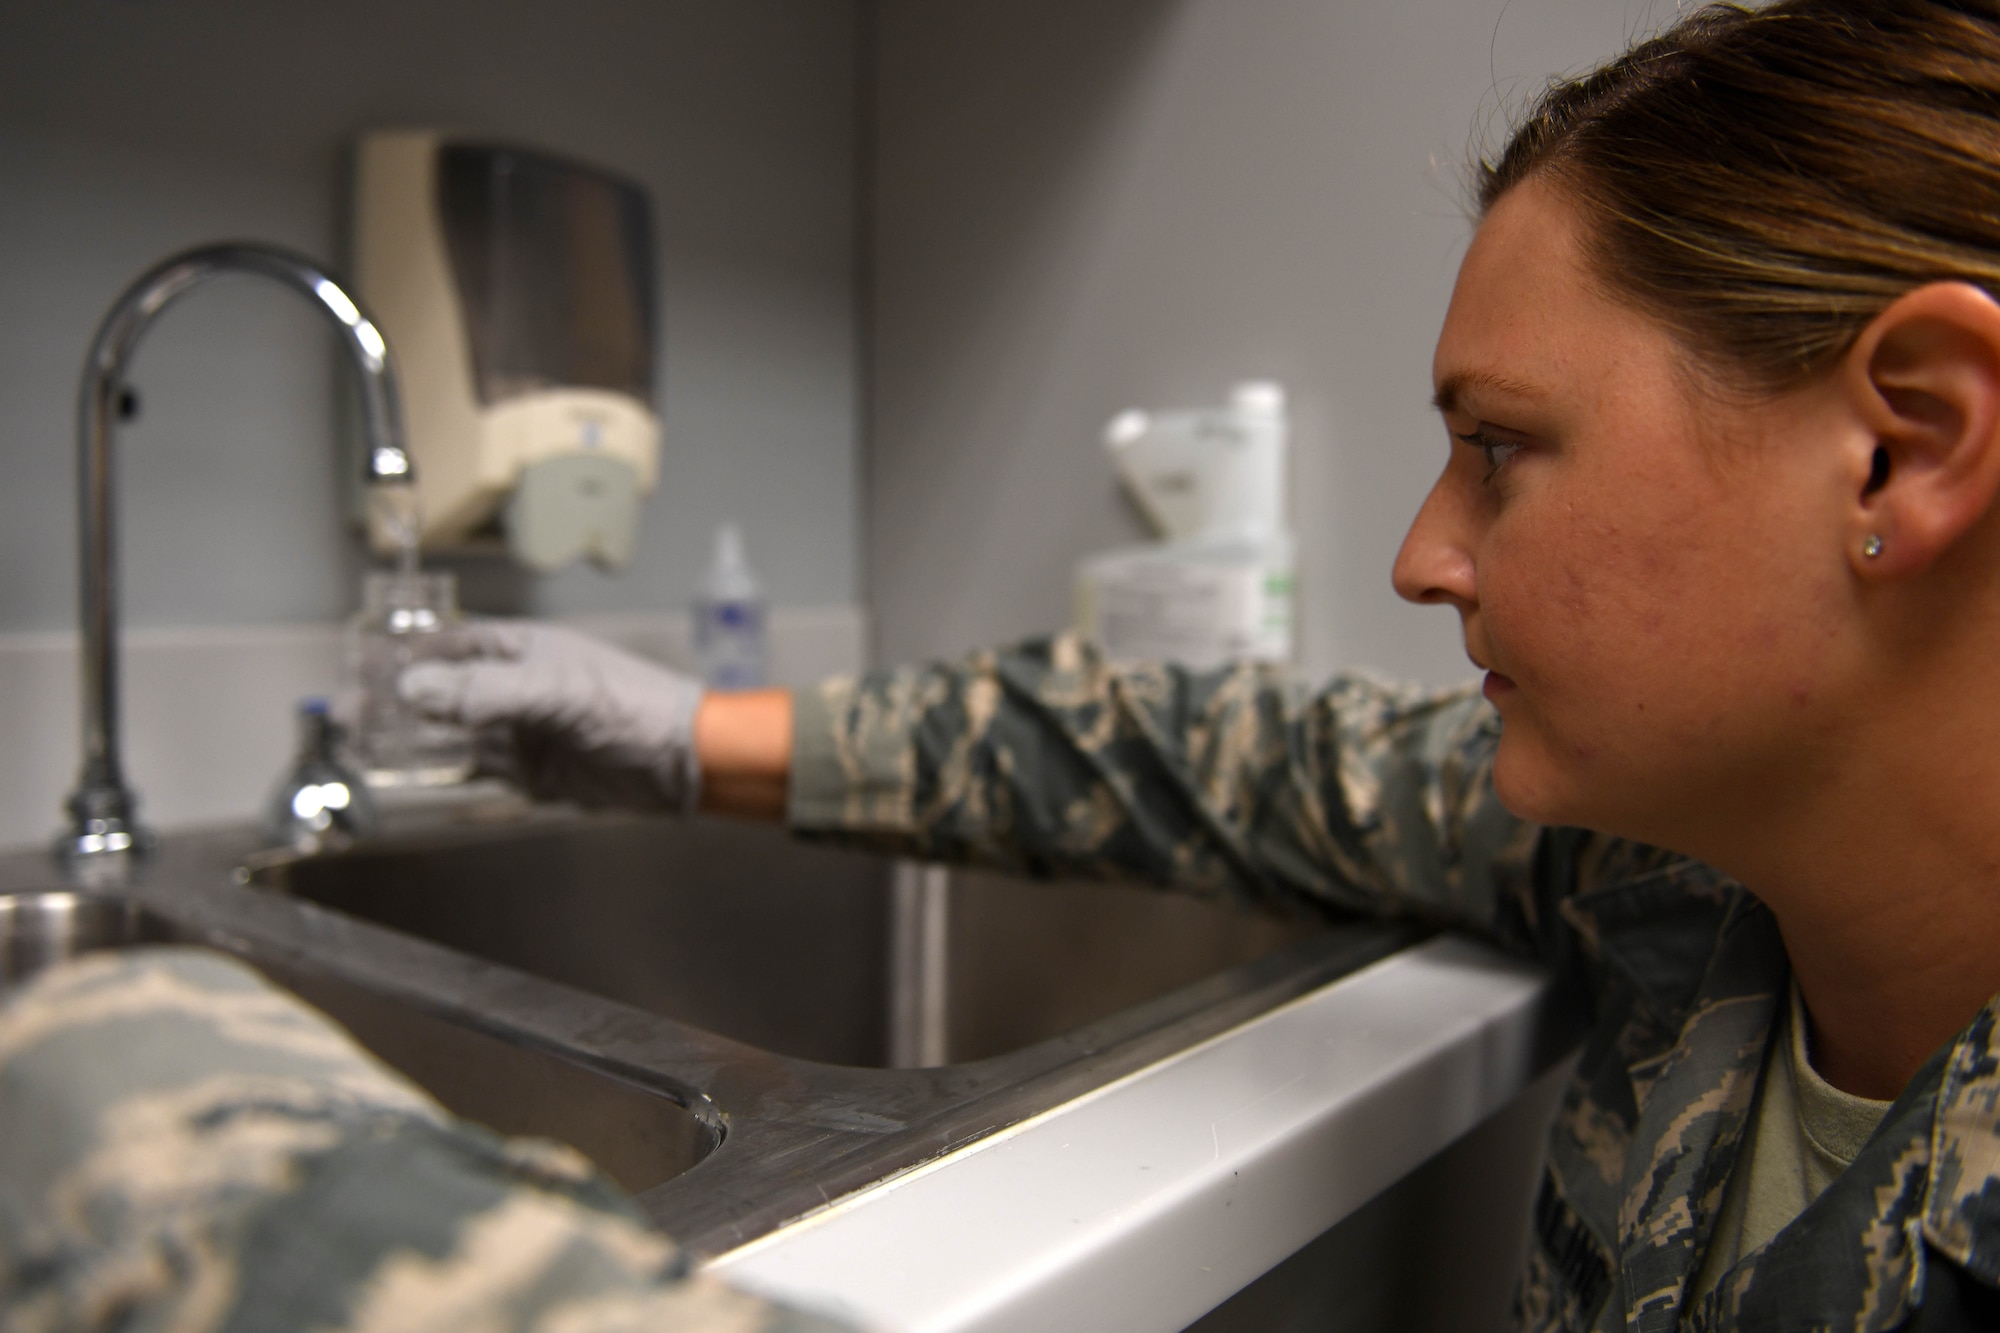 A woman wearing ABUs gets water from a faucet.